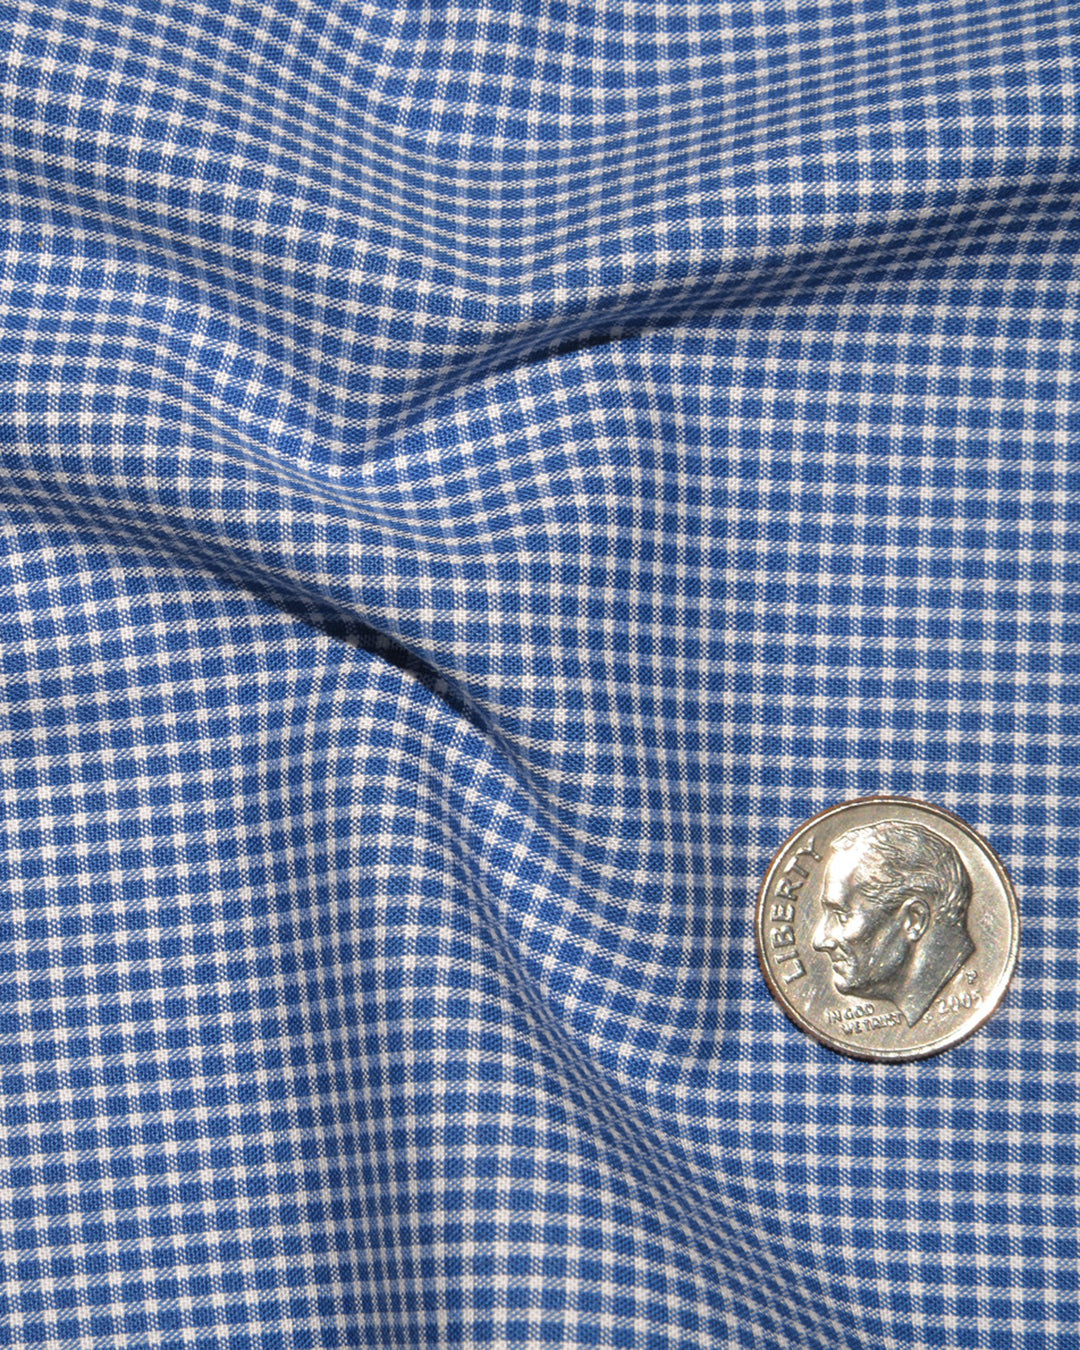 Close up view of custom check shirts for men by Luxire royal blue micro gingham